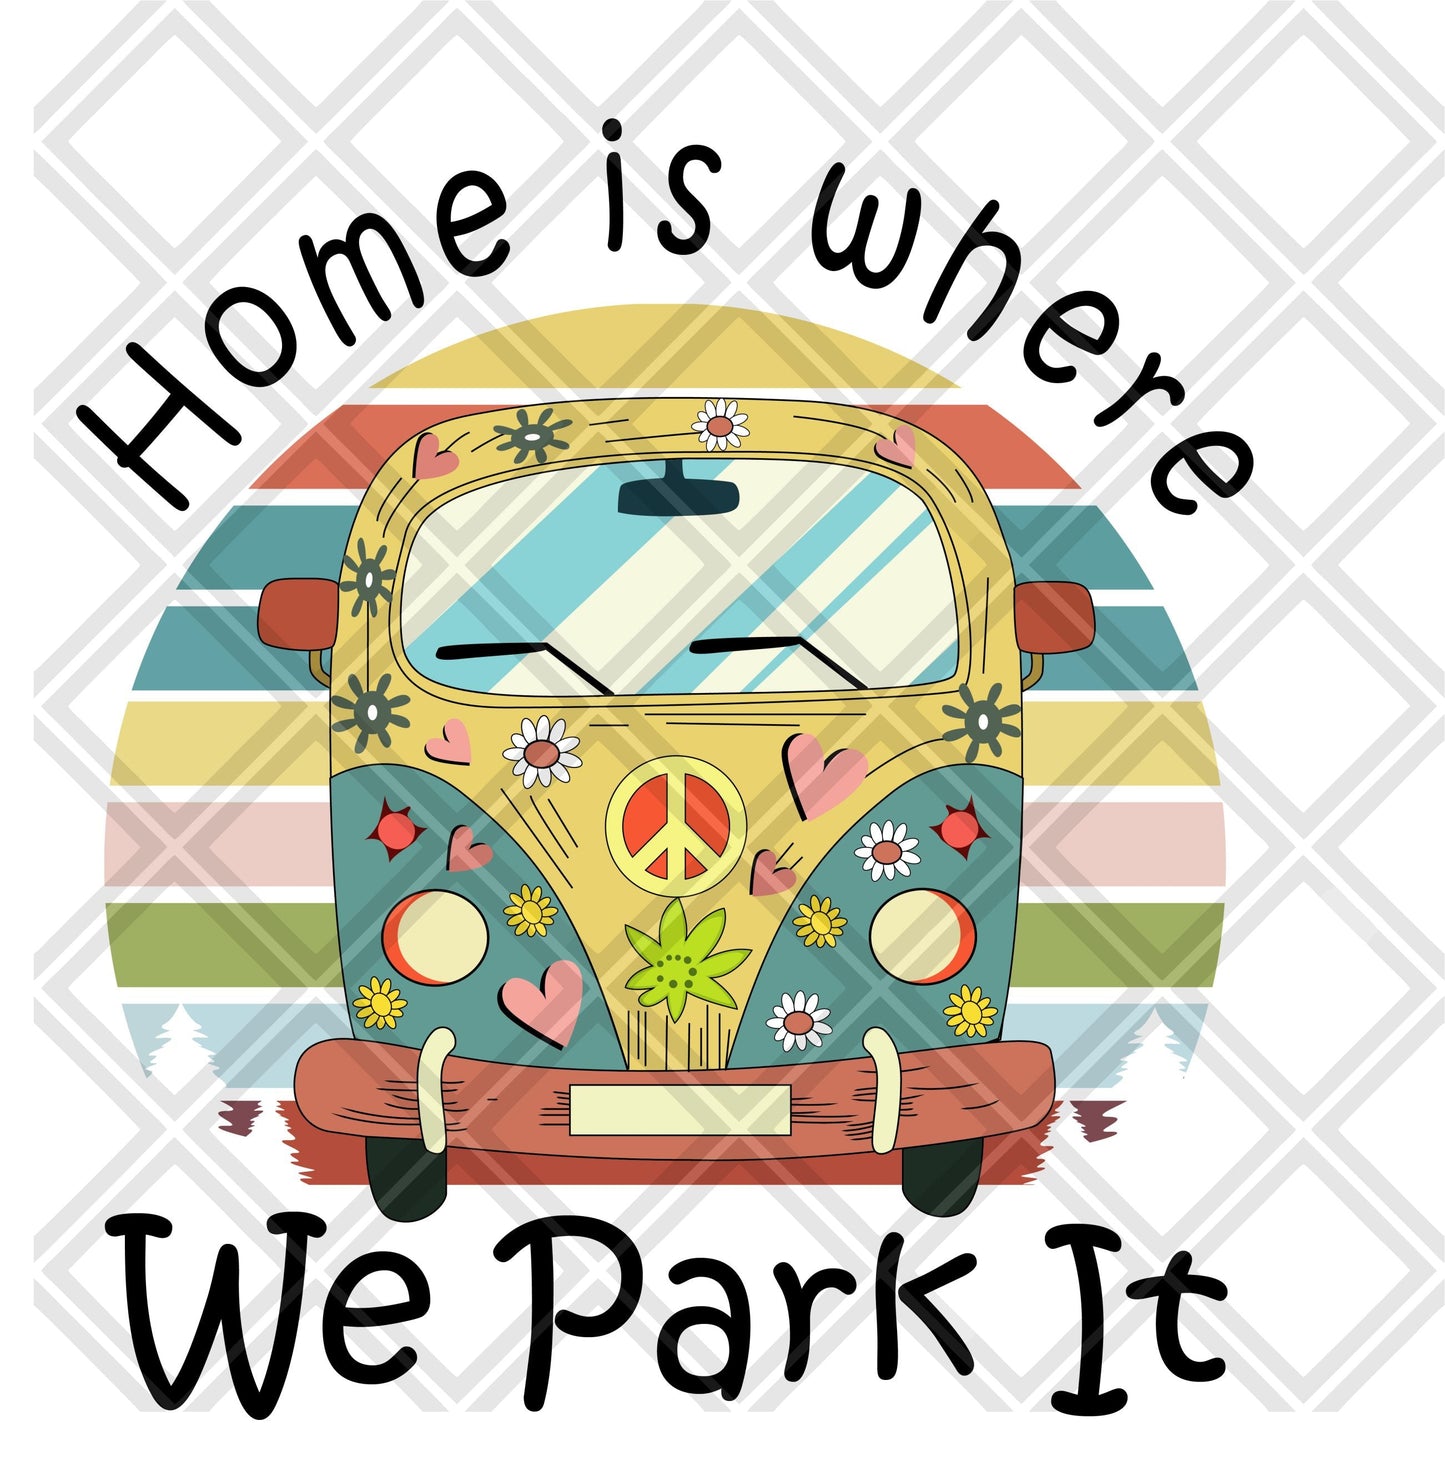 Home is where we park it DTF TRANSFERPRINT TO ORDER